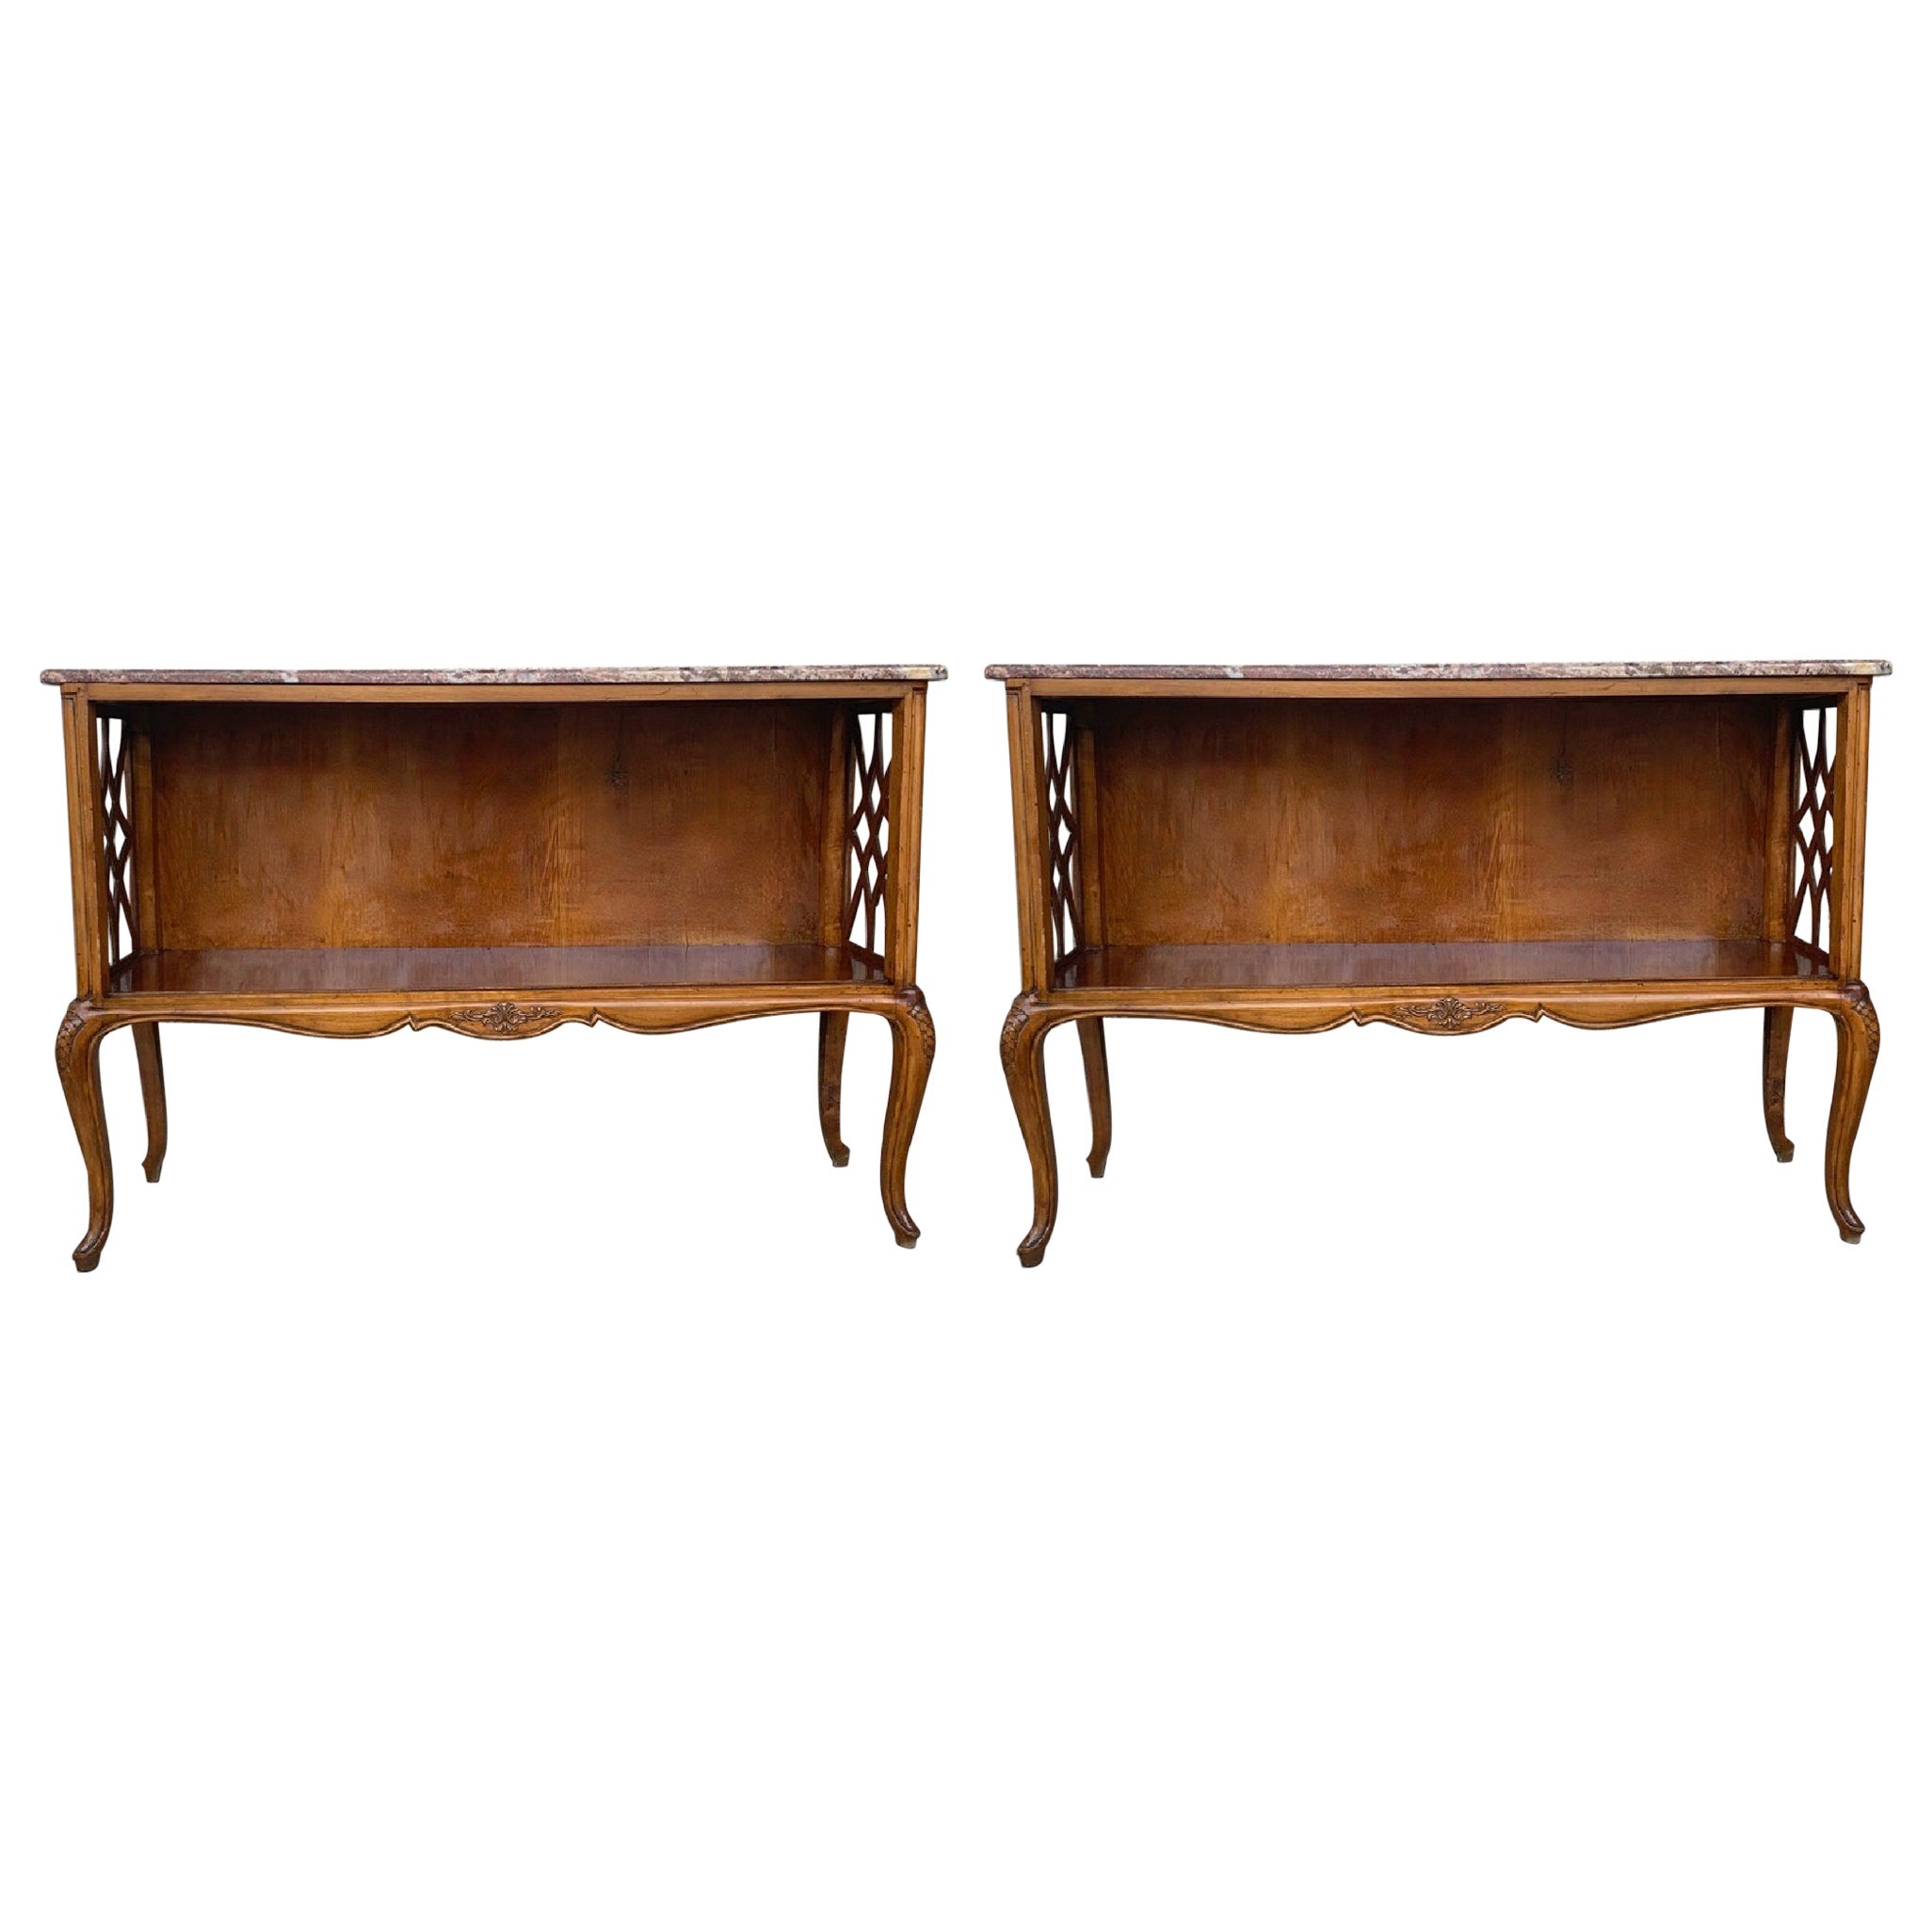 Pair of French Server Sideboard Table Carved Oak Panels with open Shelve For Sale